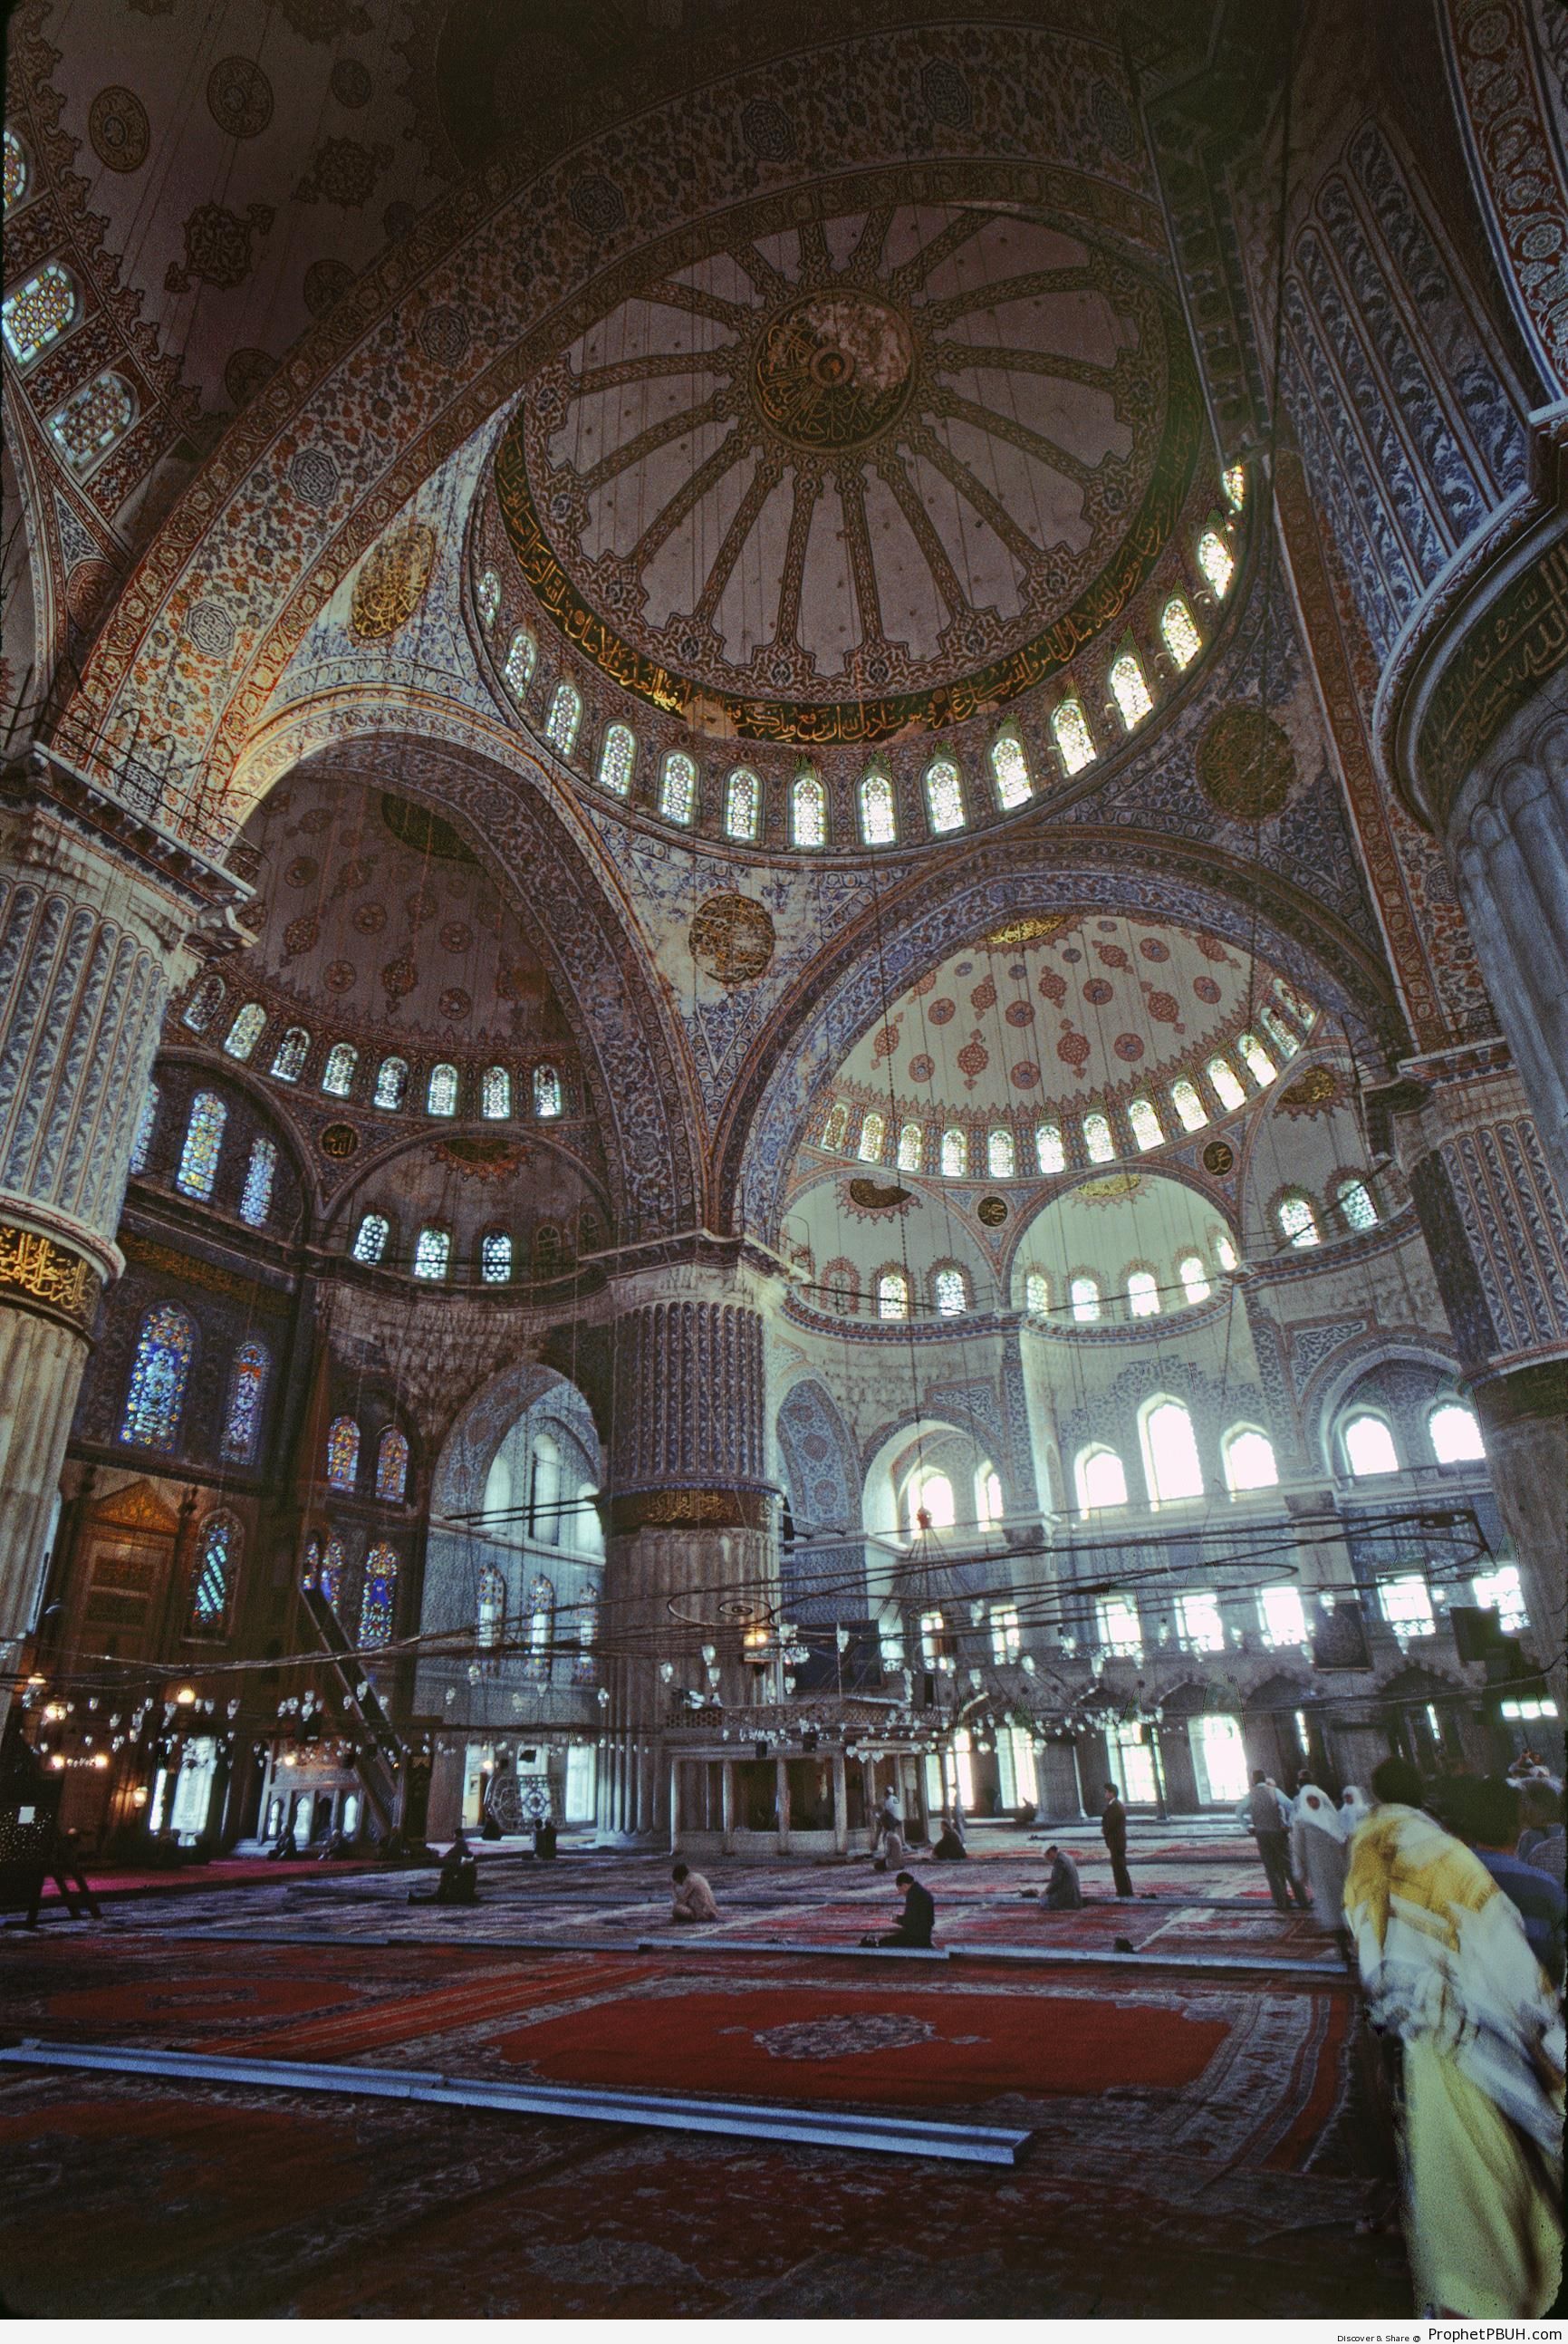 Interior of Sultan Ahmed Mosque (Blue Mosque) in Istanbul, Turkey - Islamic Architecture -Picture